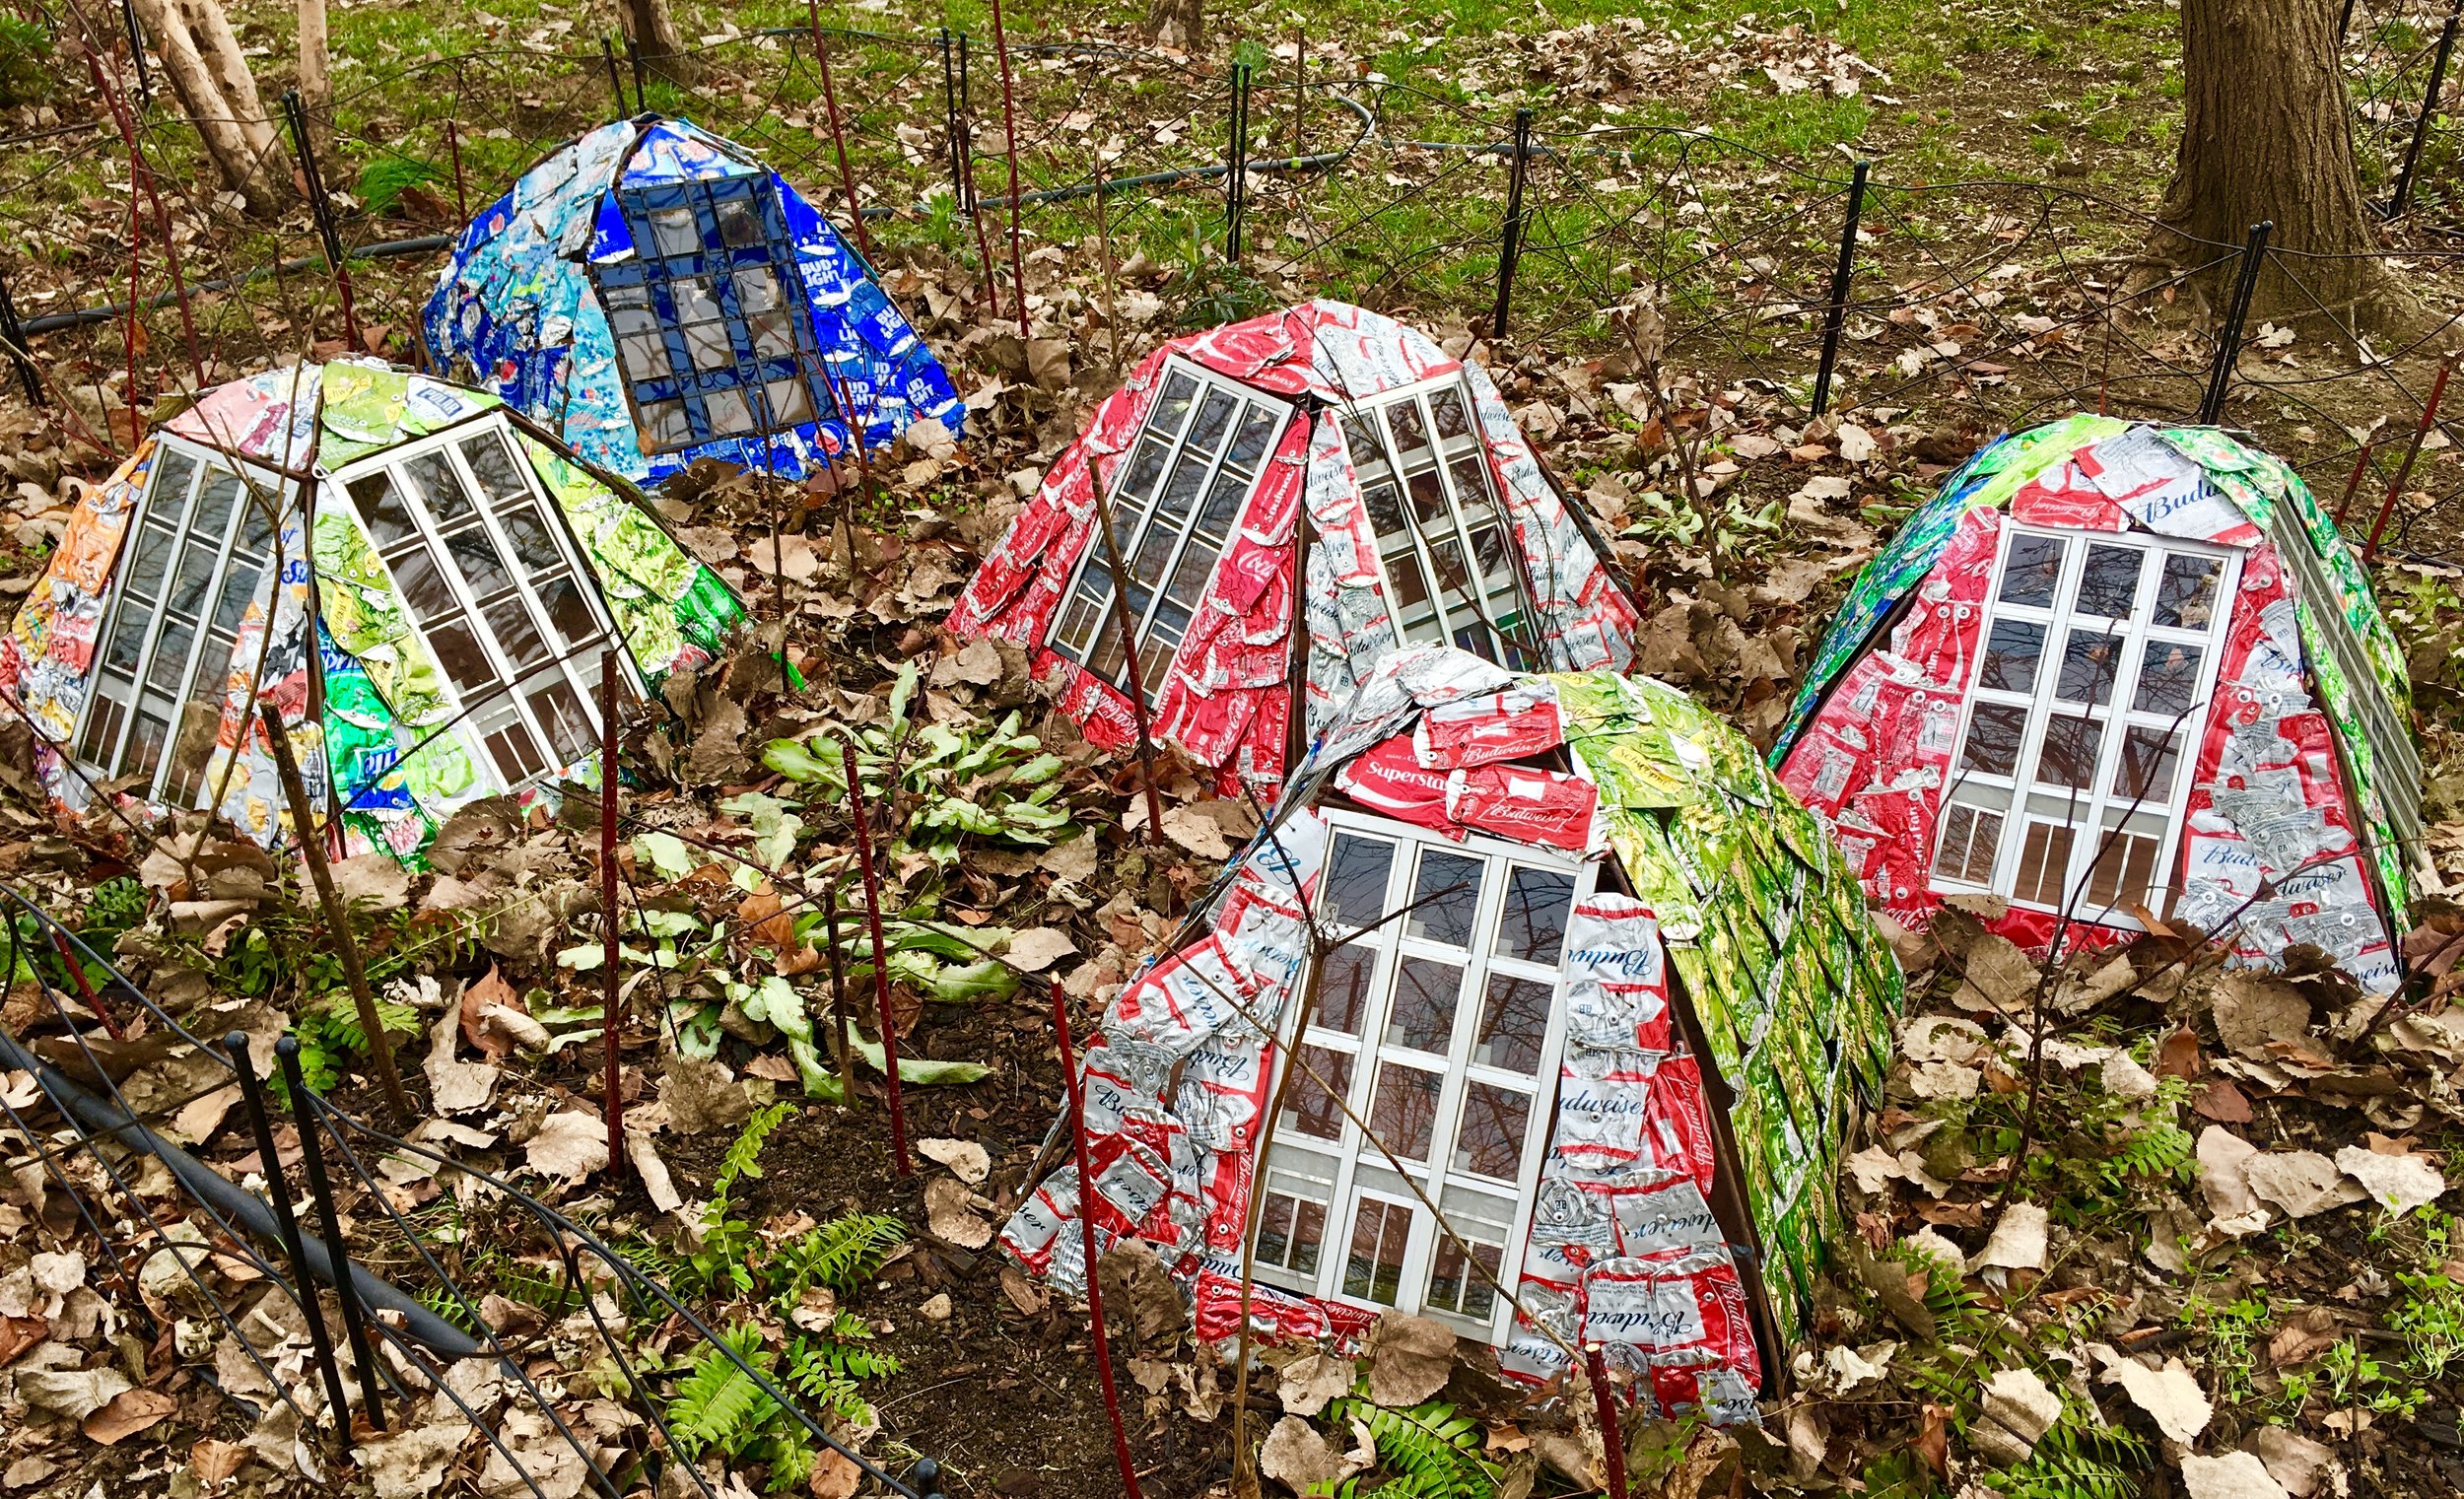  These structures covered with flattened aluminum cans are part of artist Ronen Gamil’s work “Home(-) and Garden” at Socrates Sculpture Park. 